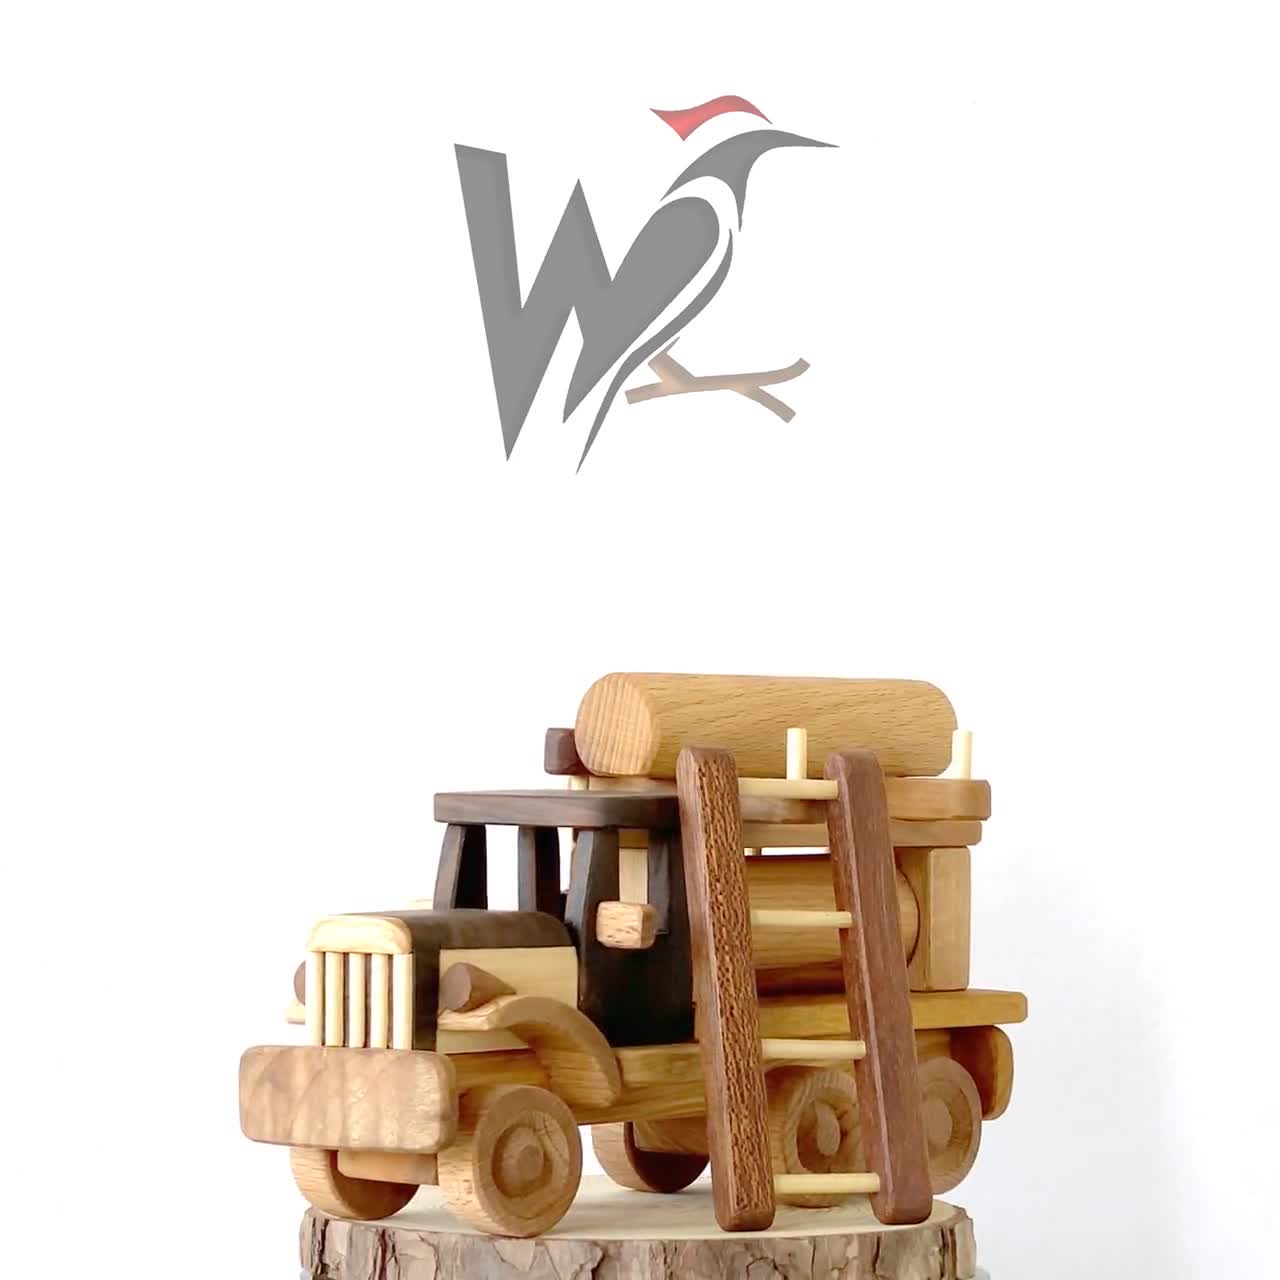 Wooden Toy Combine Harvester, Wooden Toys for Kids, Gift for